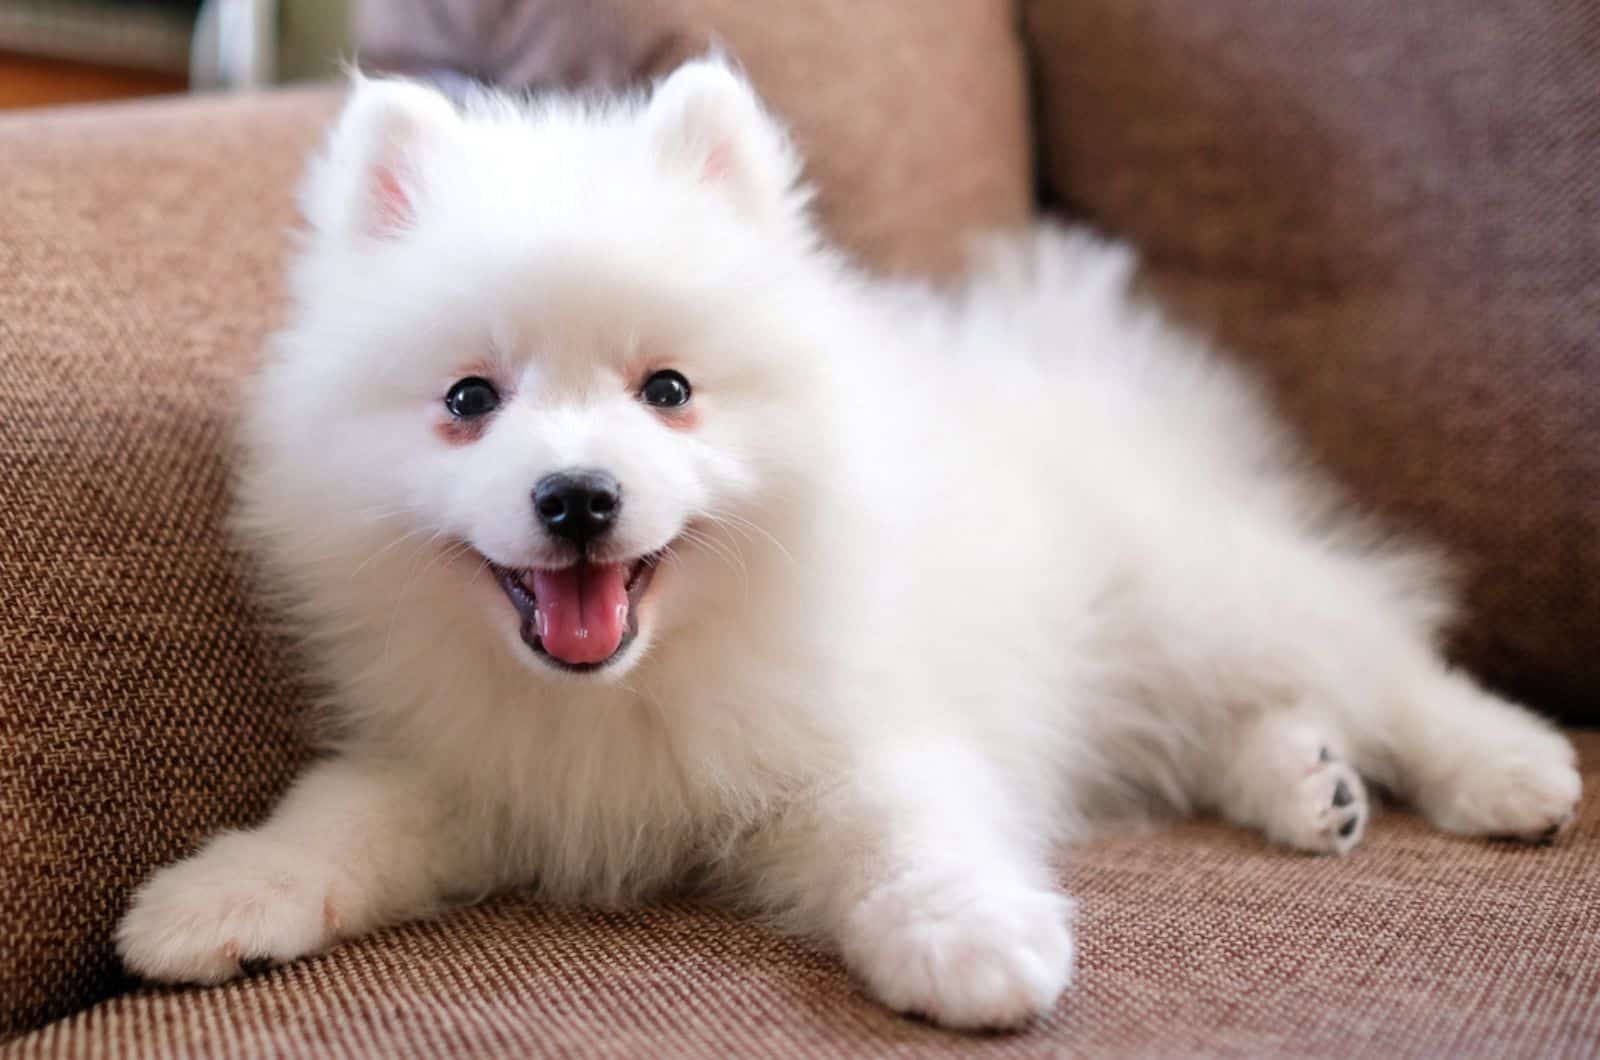 Japanese Spitz Price: How Expensive Is This Cutie?